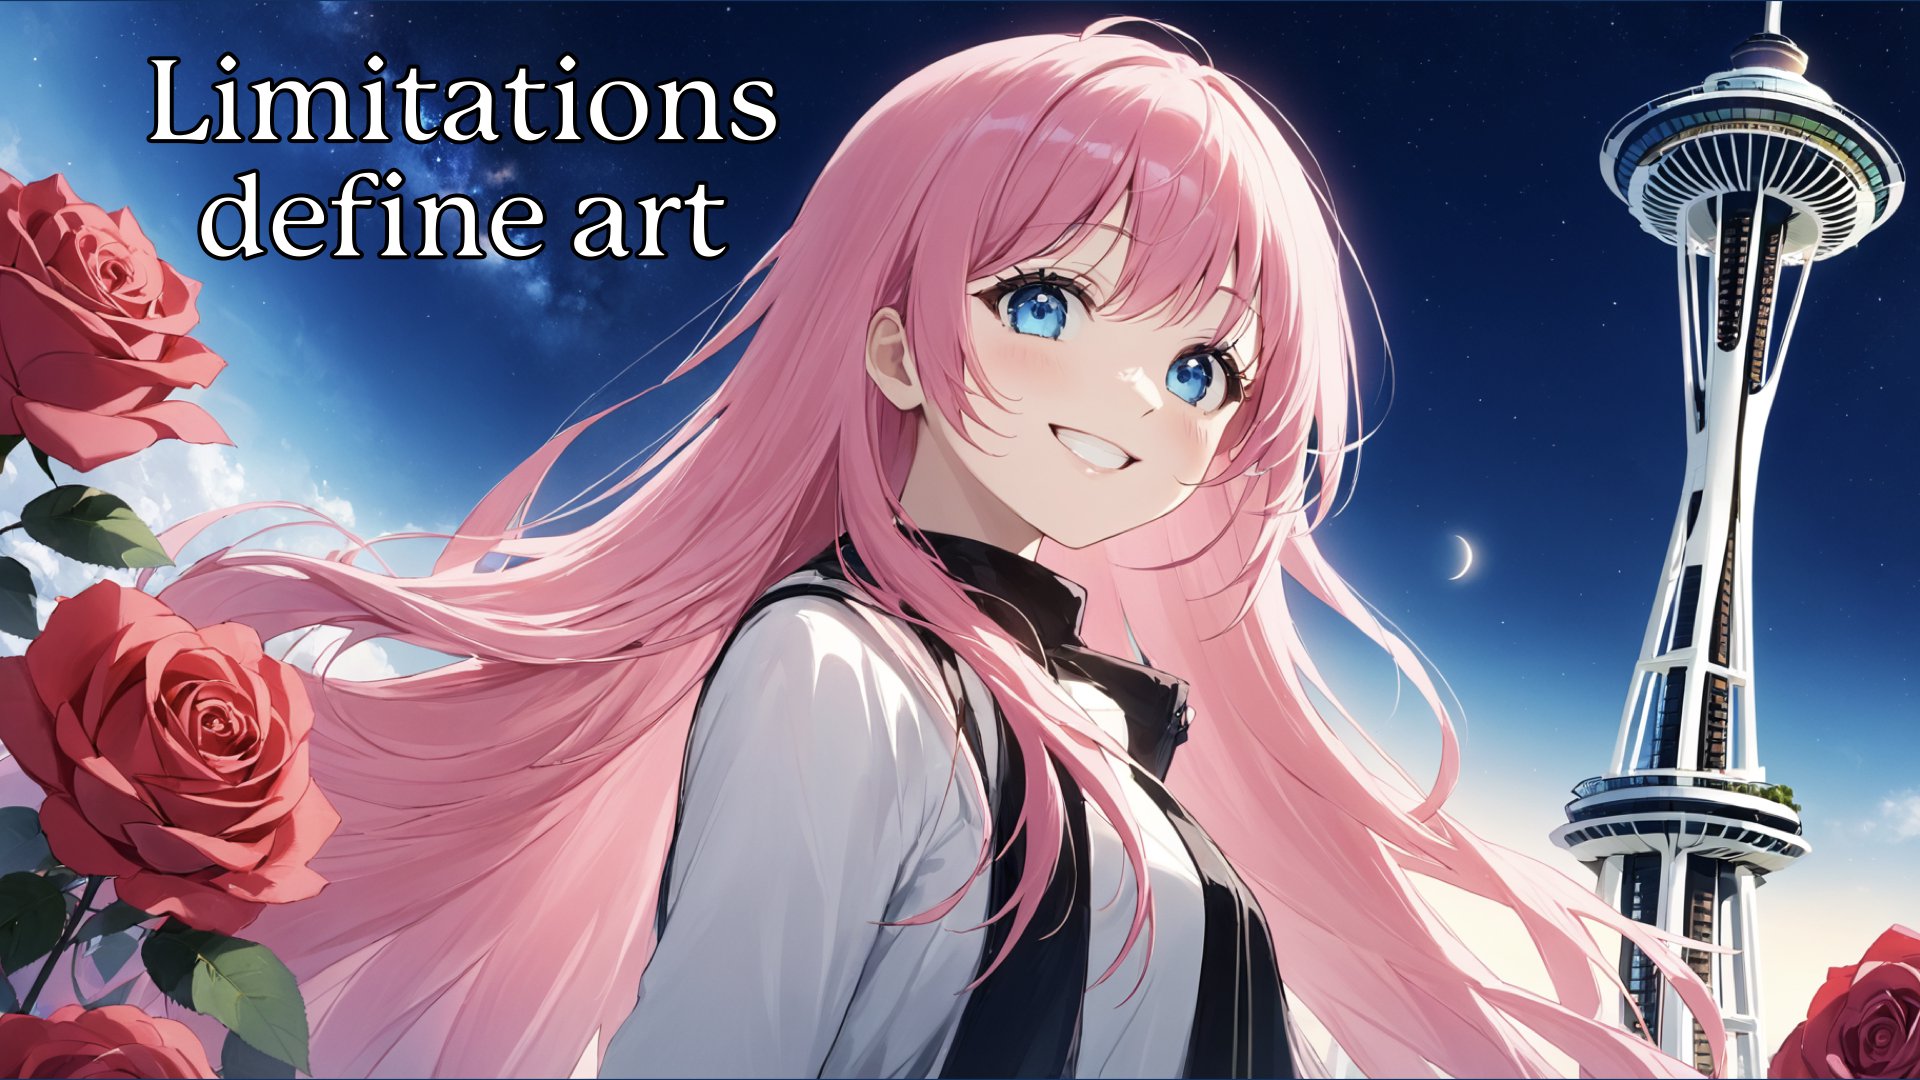 An ai-generated illustration of a blue-eyed pink haired anime woman smiling in front of the Space Needle with roses surrounding the image. The overlaid text says 'Limitations define art'.